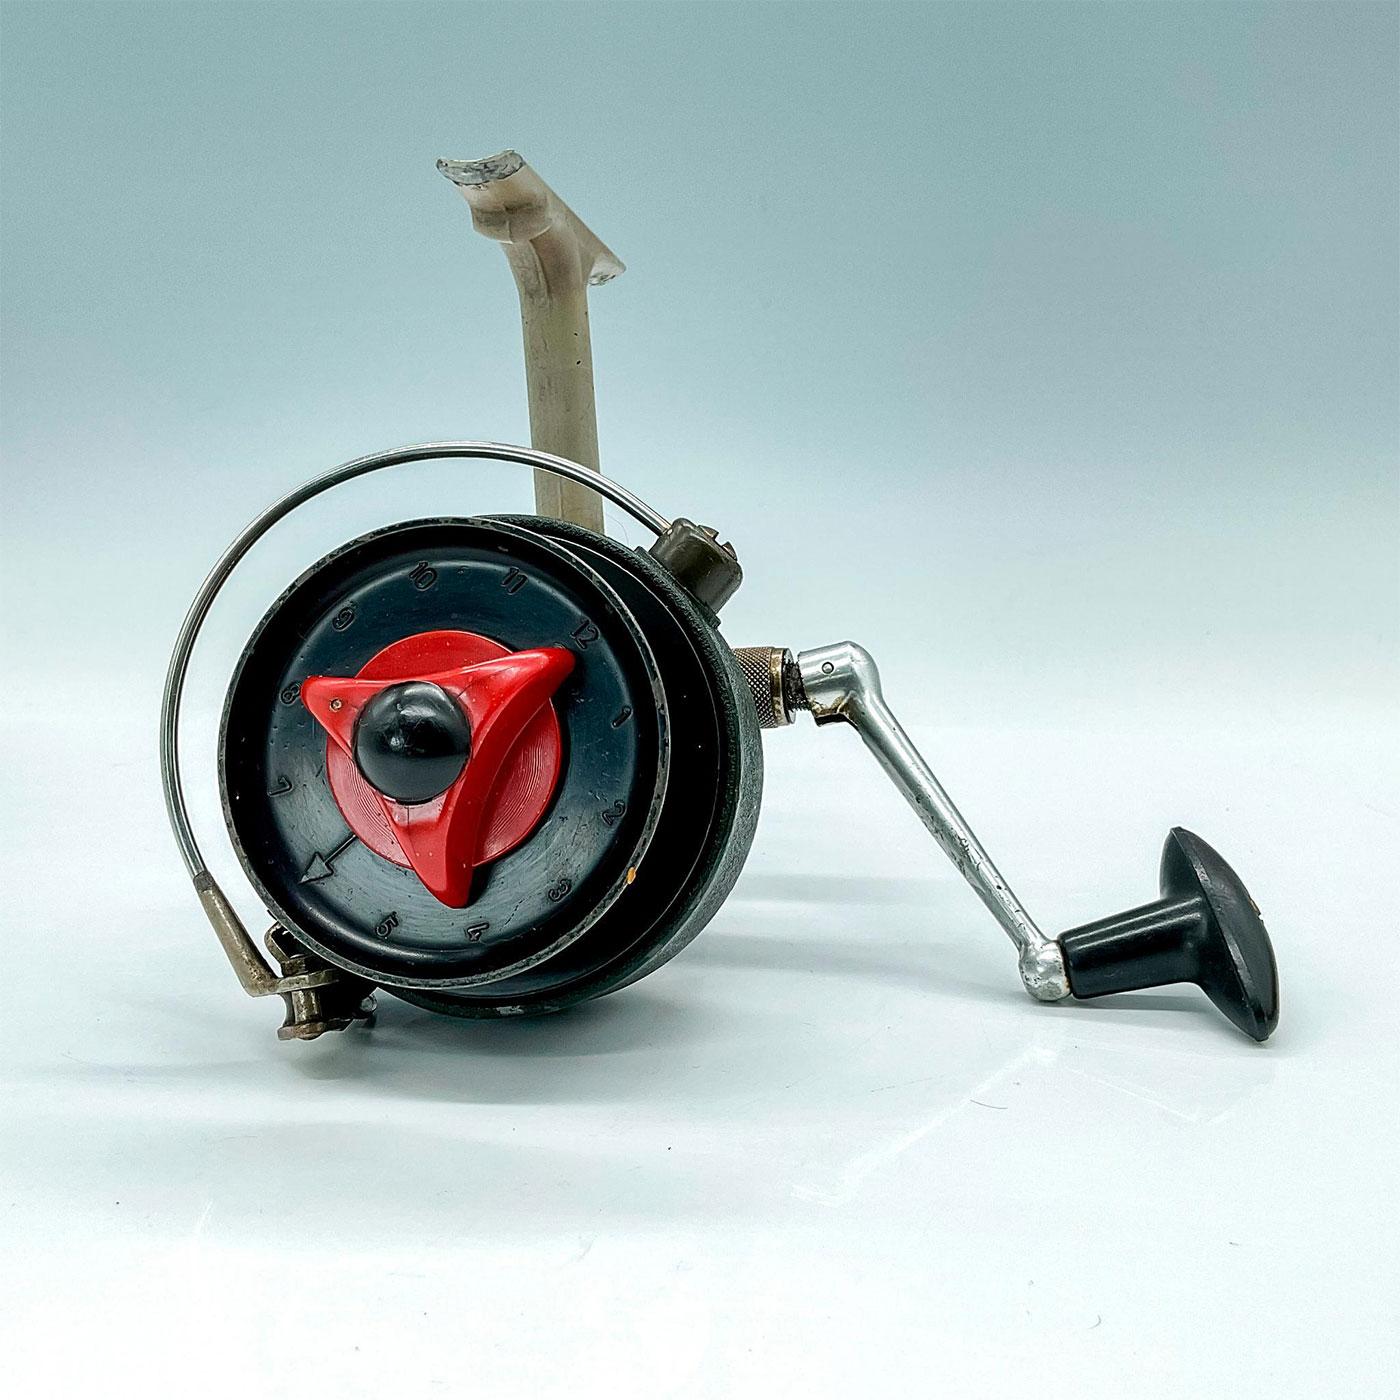 VINTAGE DAM QUICK Super Freshwater Saltwater Spinning Reel Made in West  Germany $39.99 - PicClick